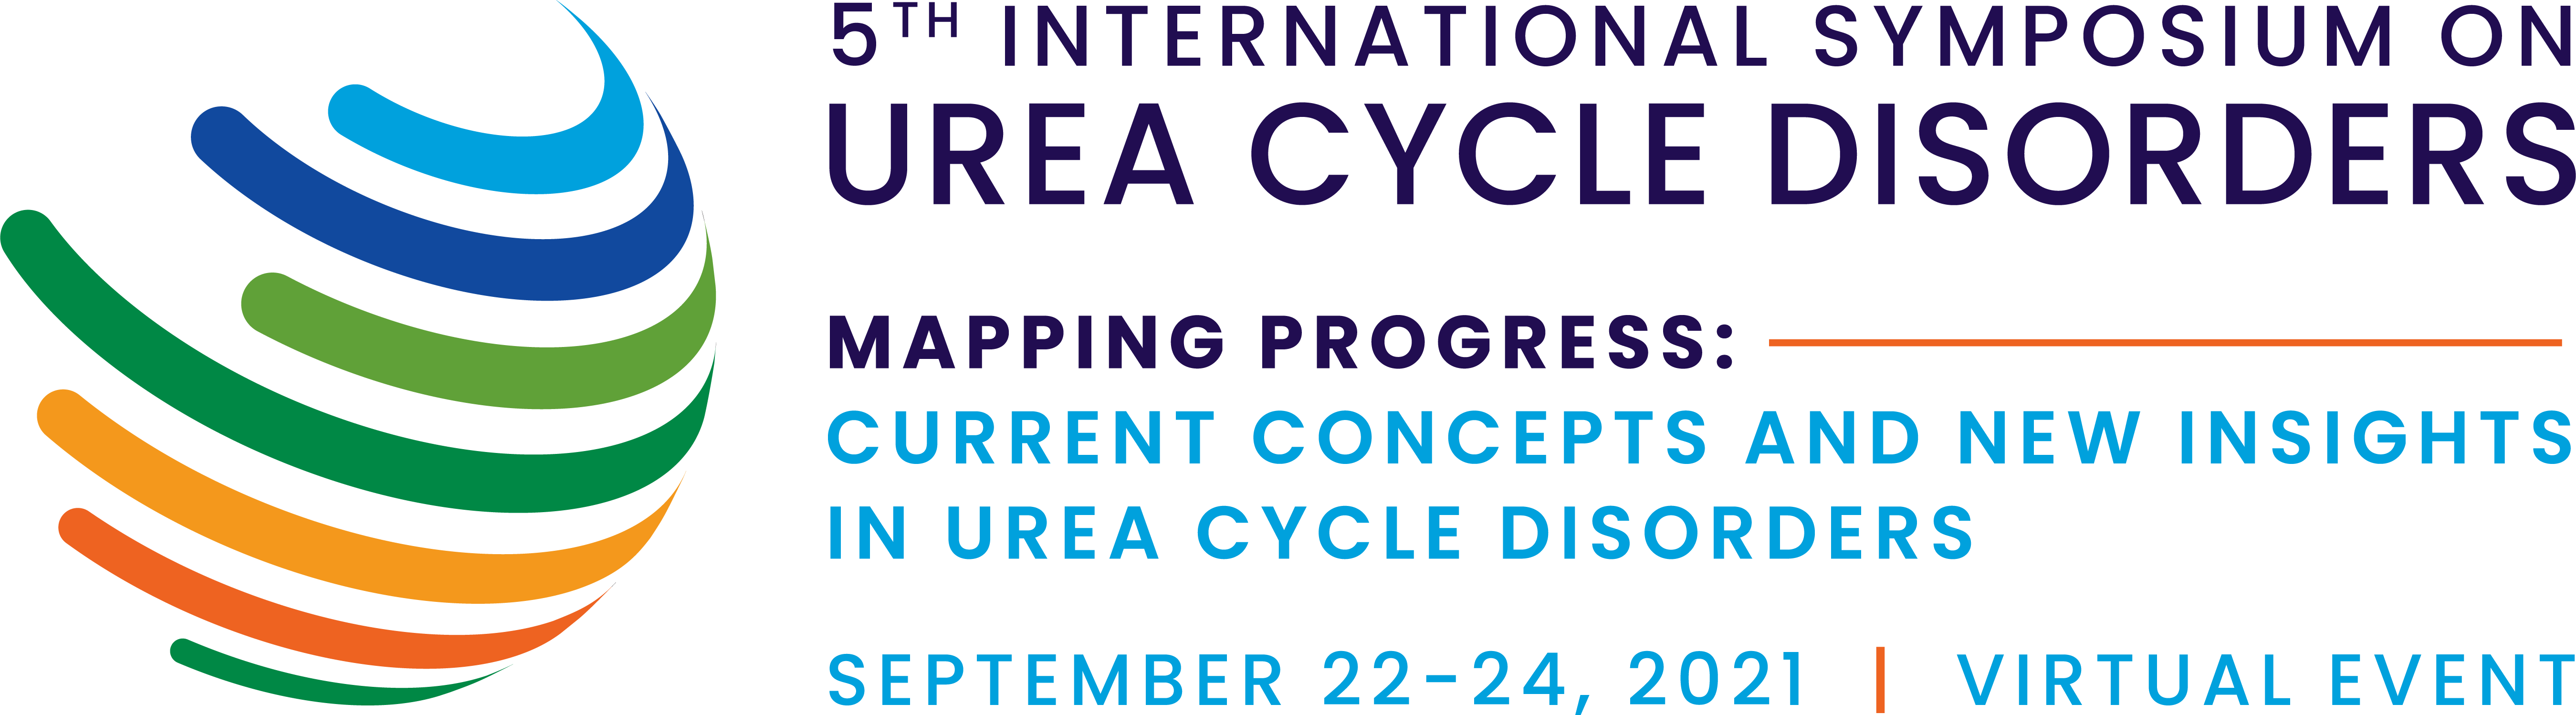 UCDC Event Banner for the 5th International Symposium on Urea Cycle Disorders